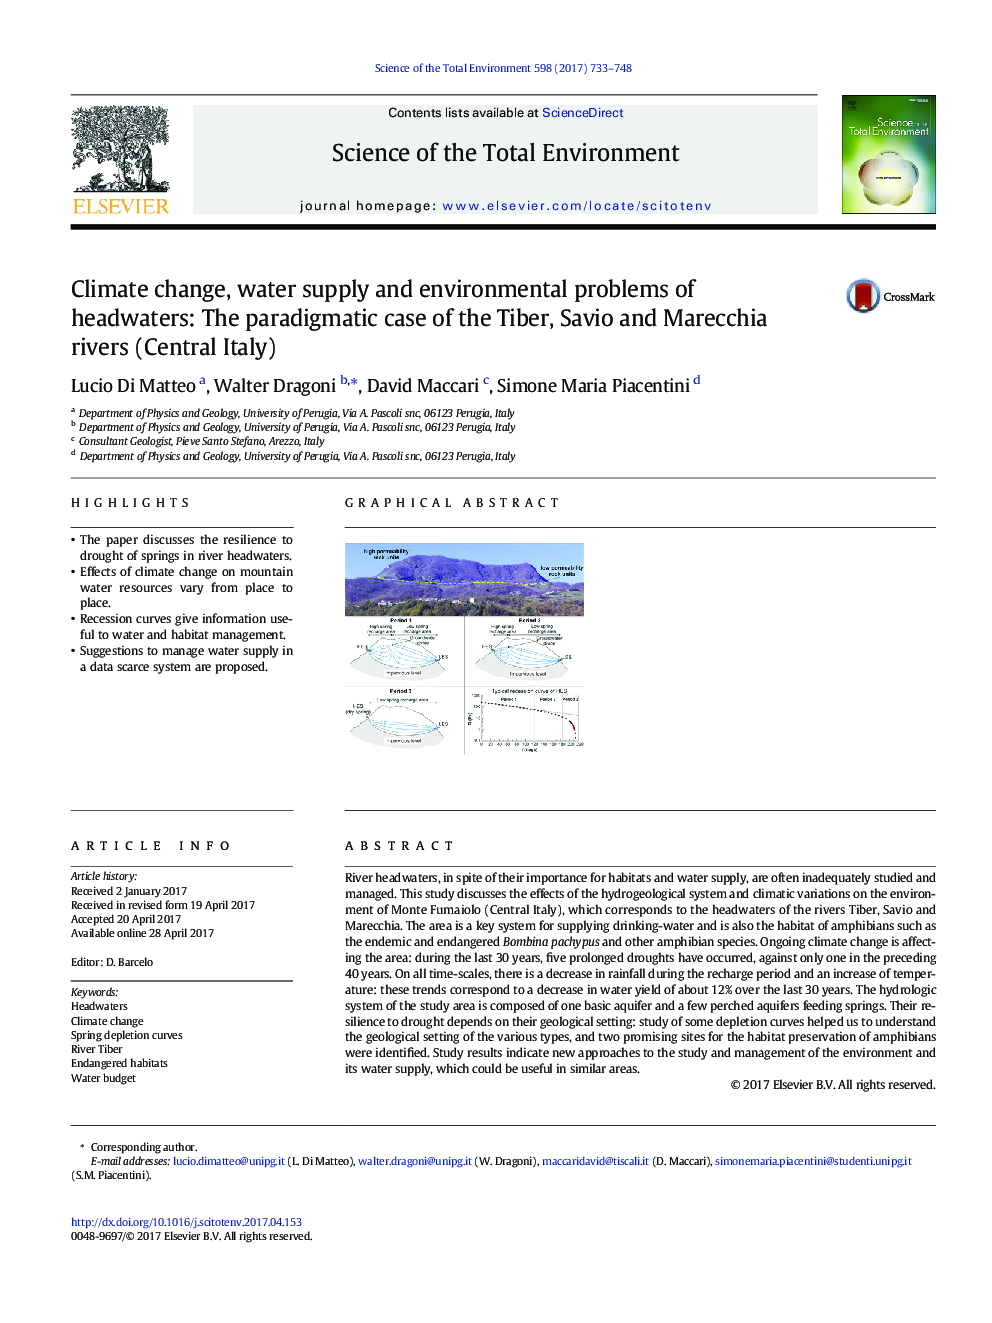 Climate change, water supply and environmental problems of headwaters: The paradigmatic case of the Tiber, Savio and Marecchia rivers (Central Italy)